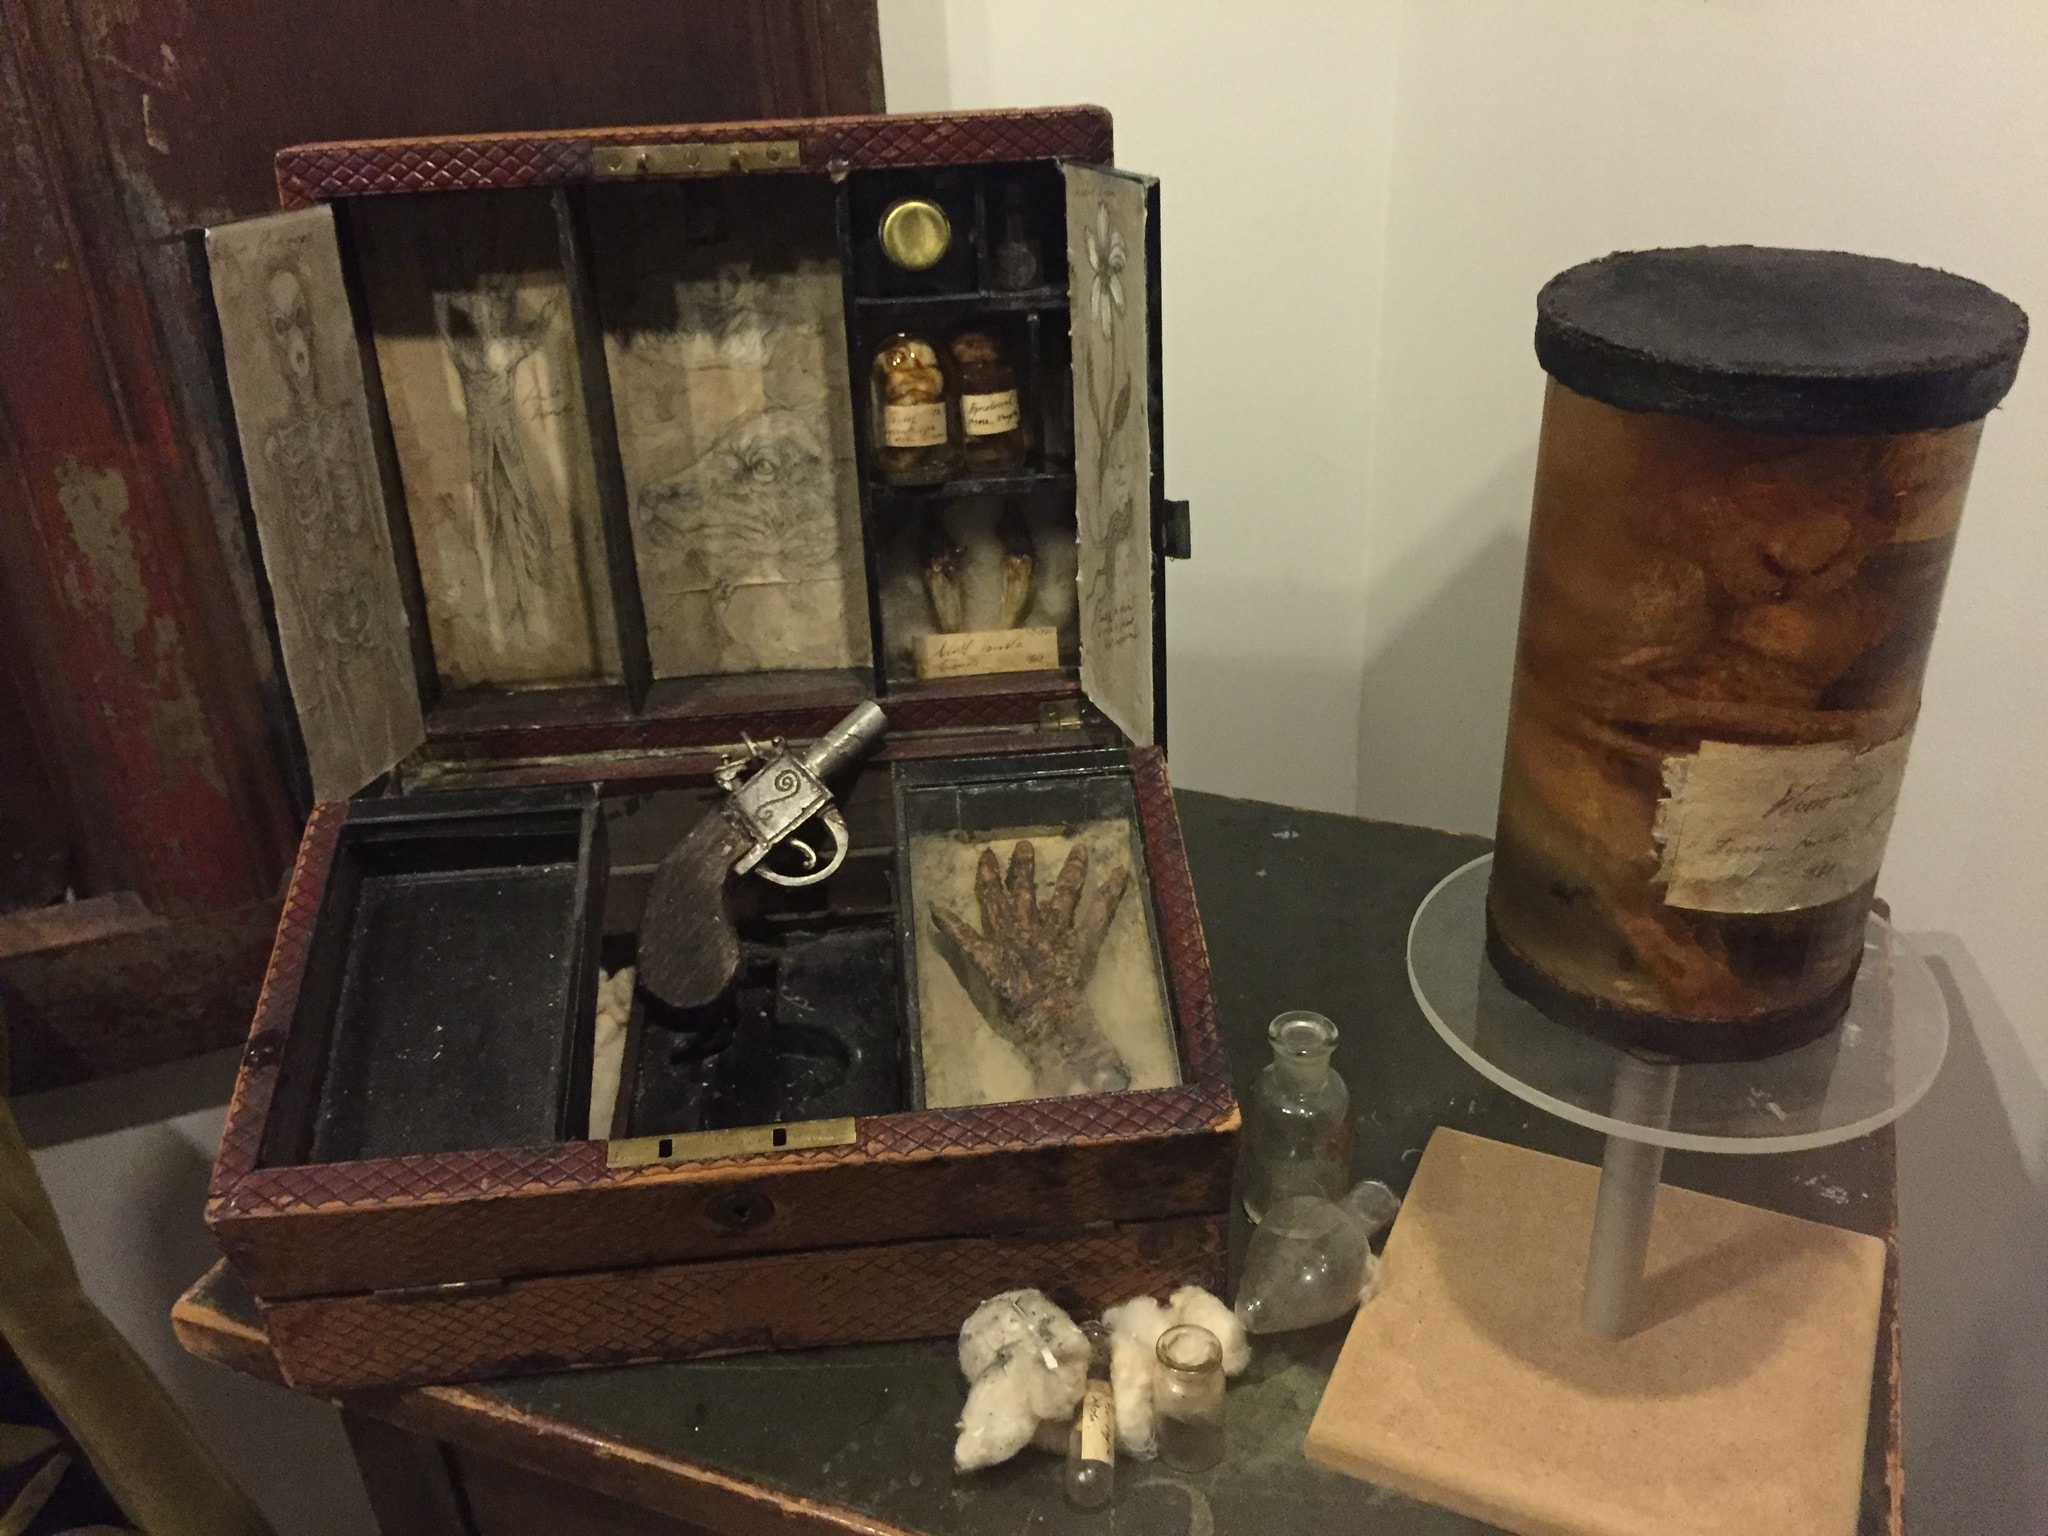 A box with many compartments, a small pistol, and a jar with brown liquid.